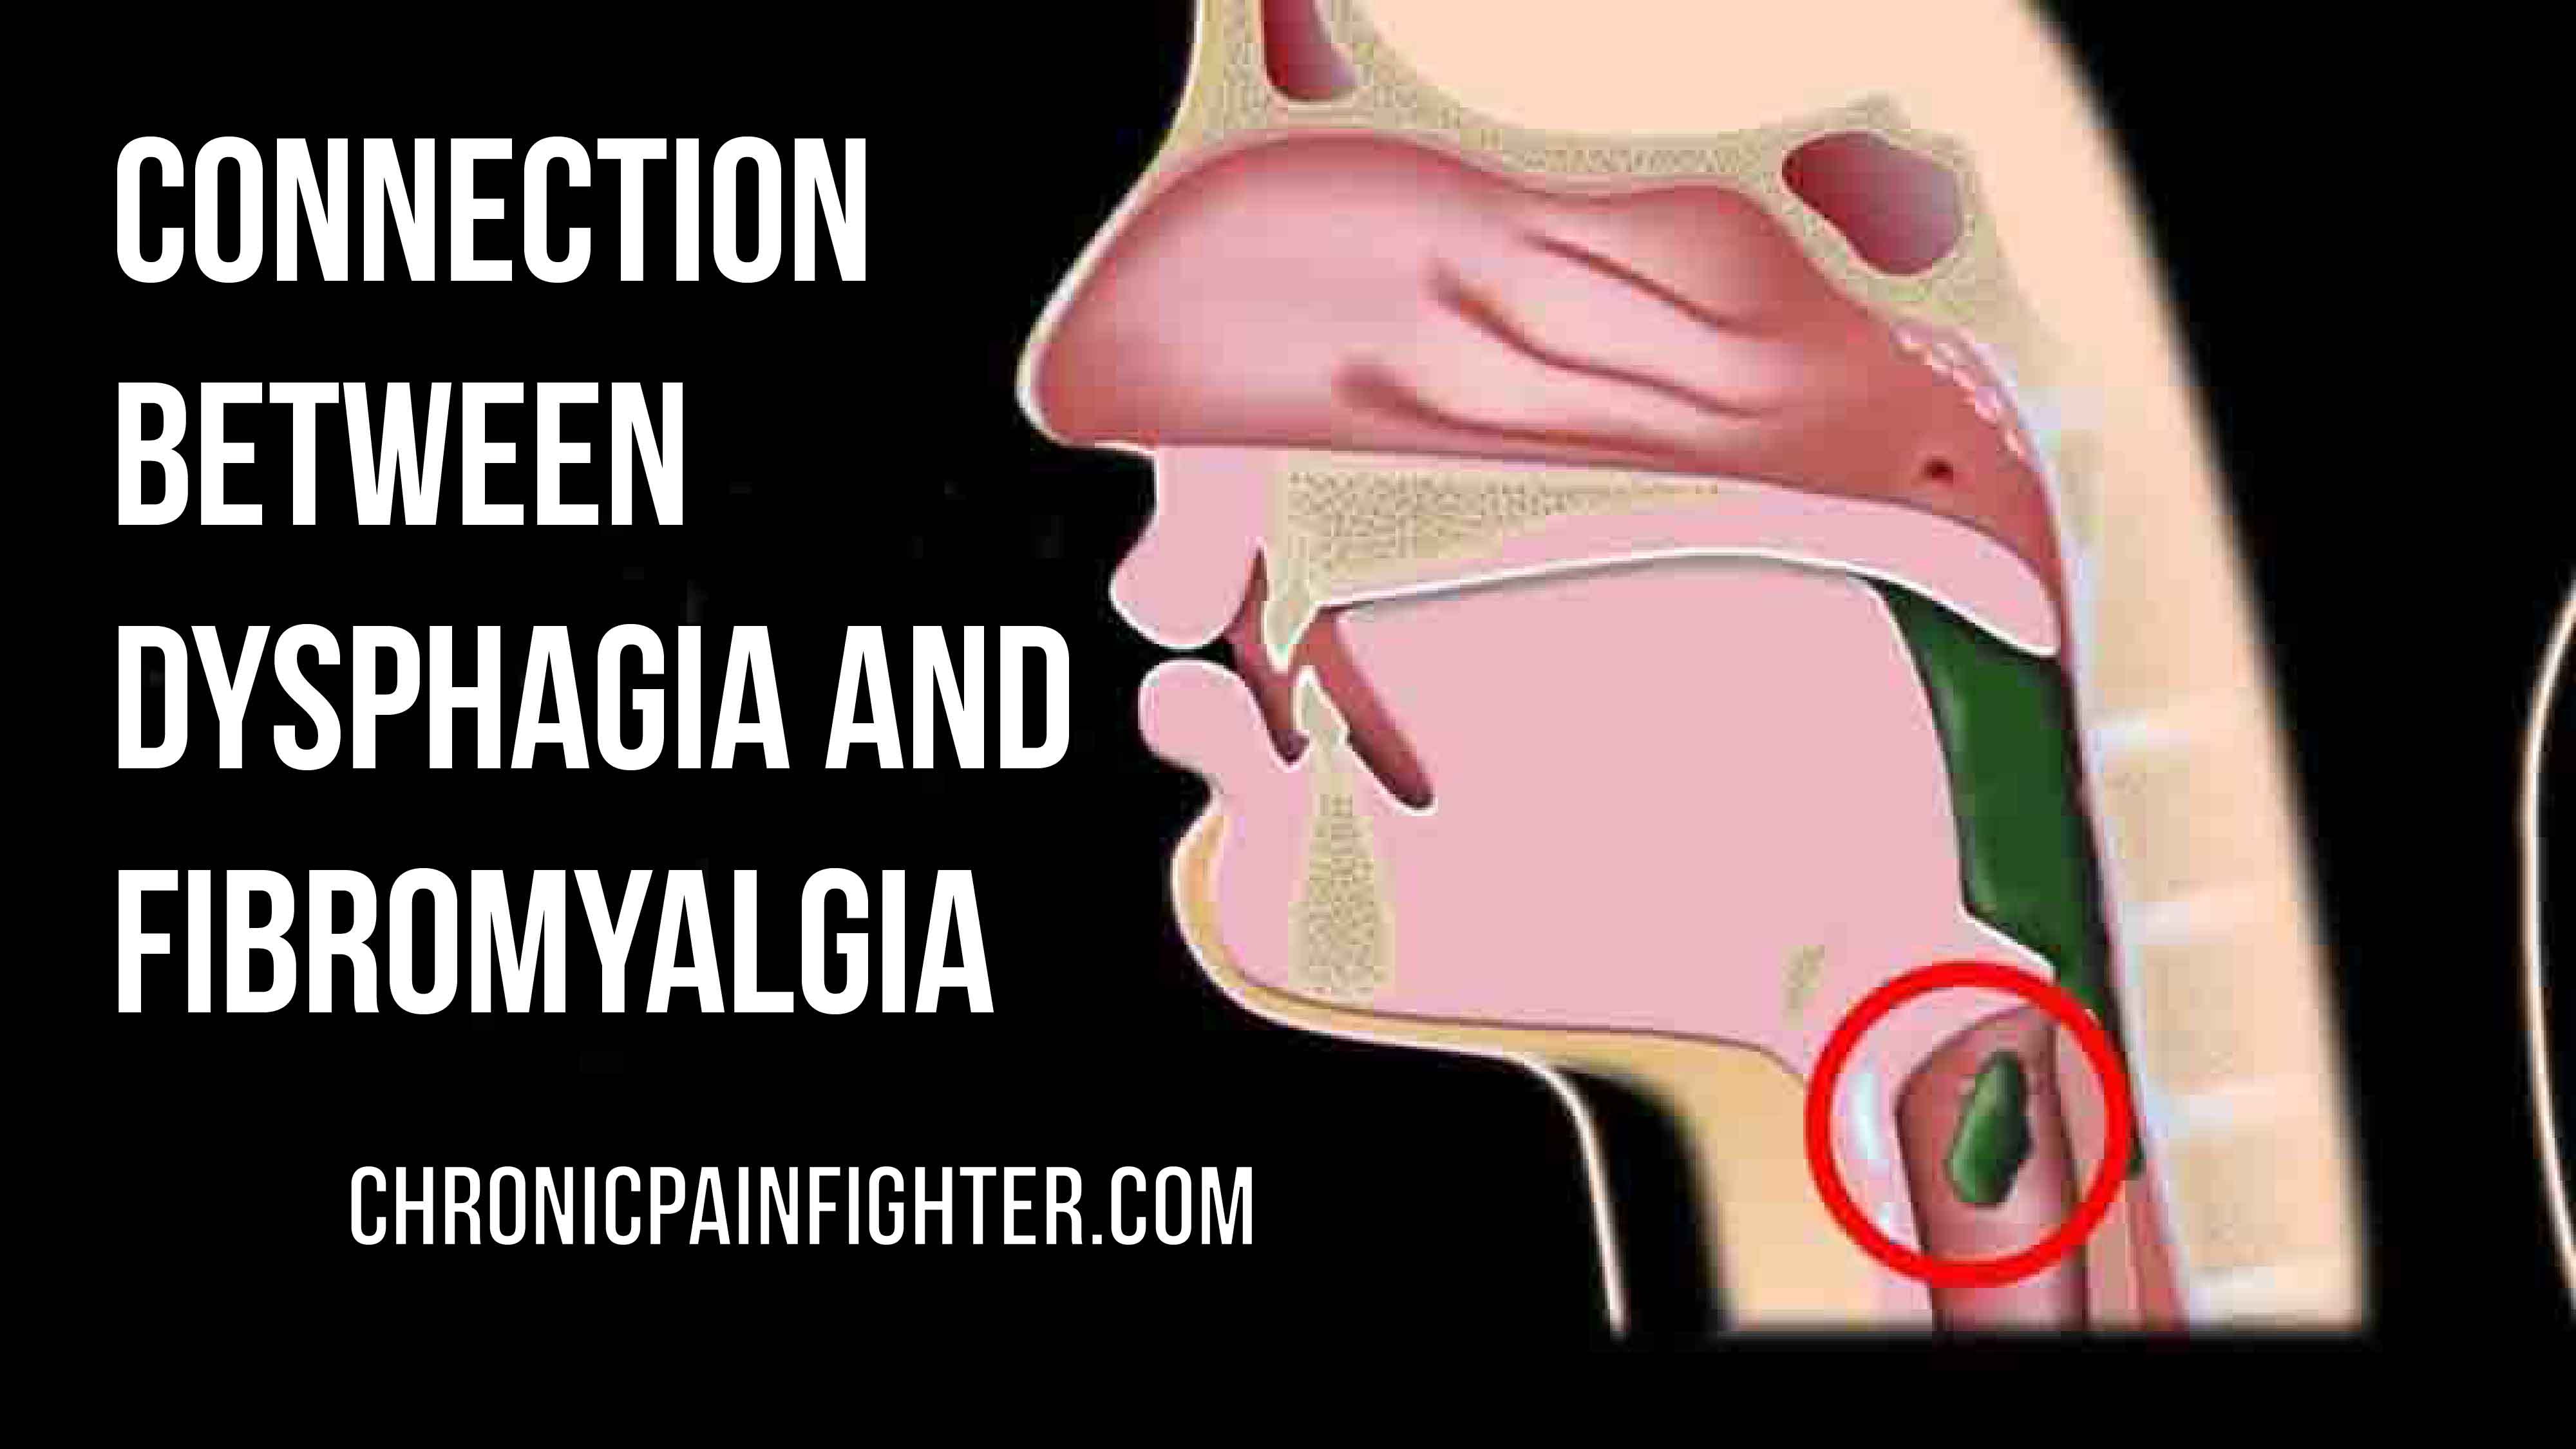 Connection between Dysphagia and Fibromyalgia